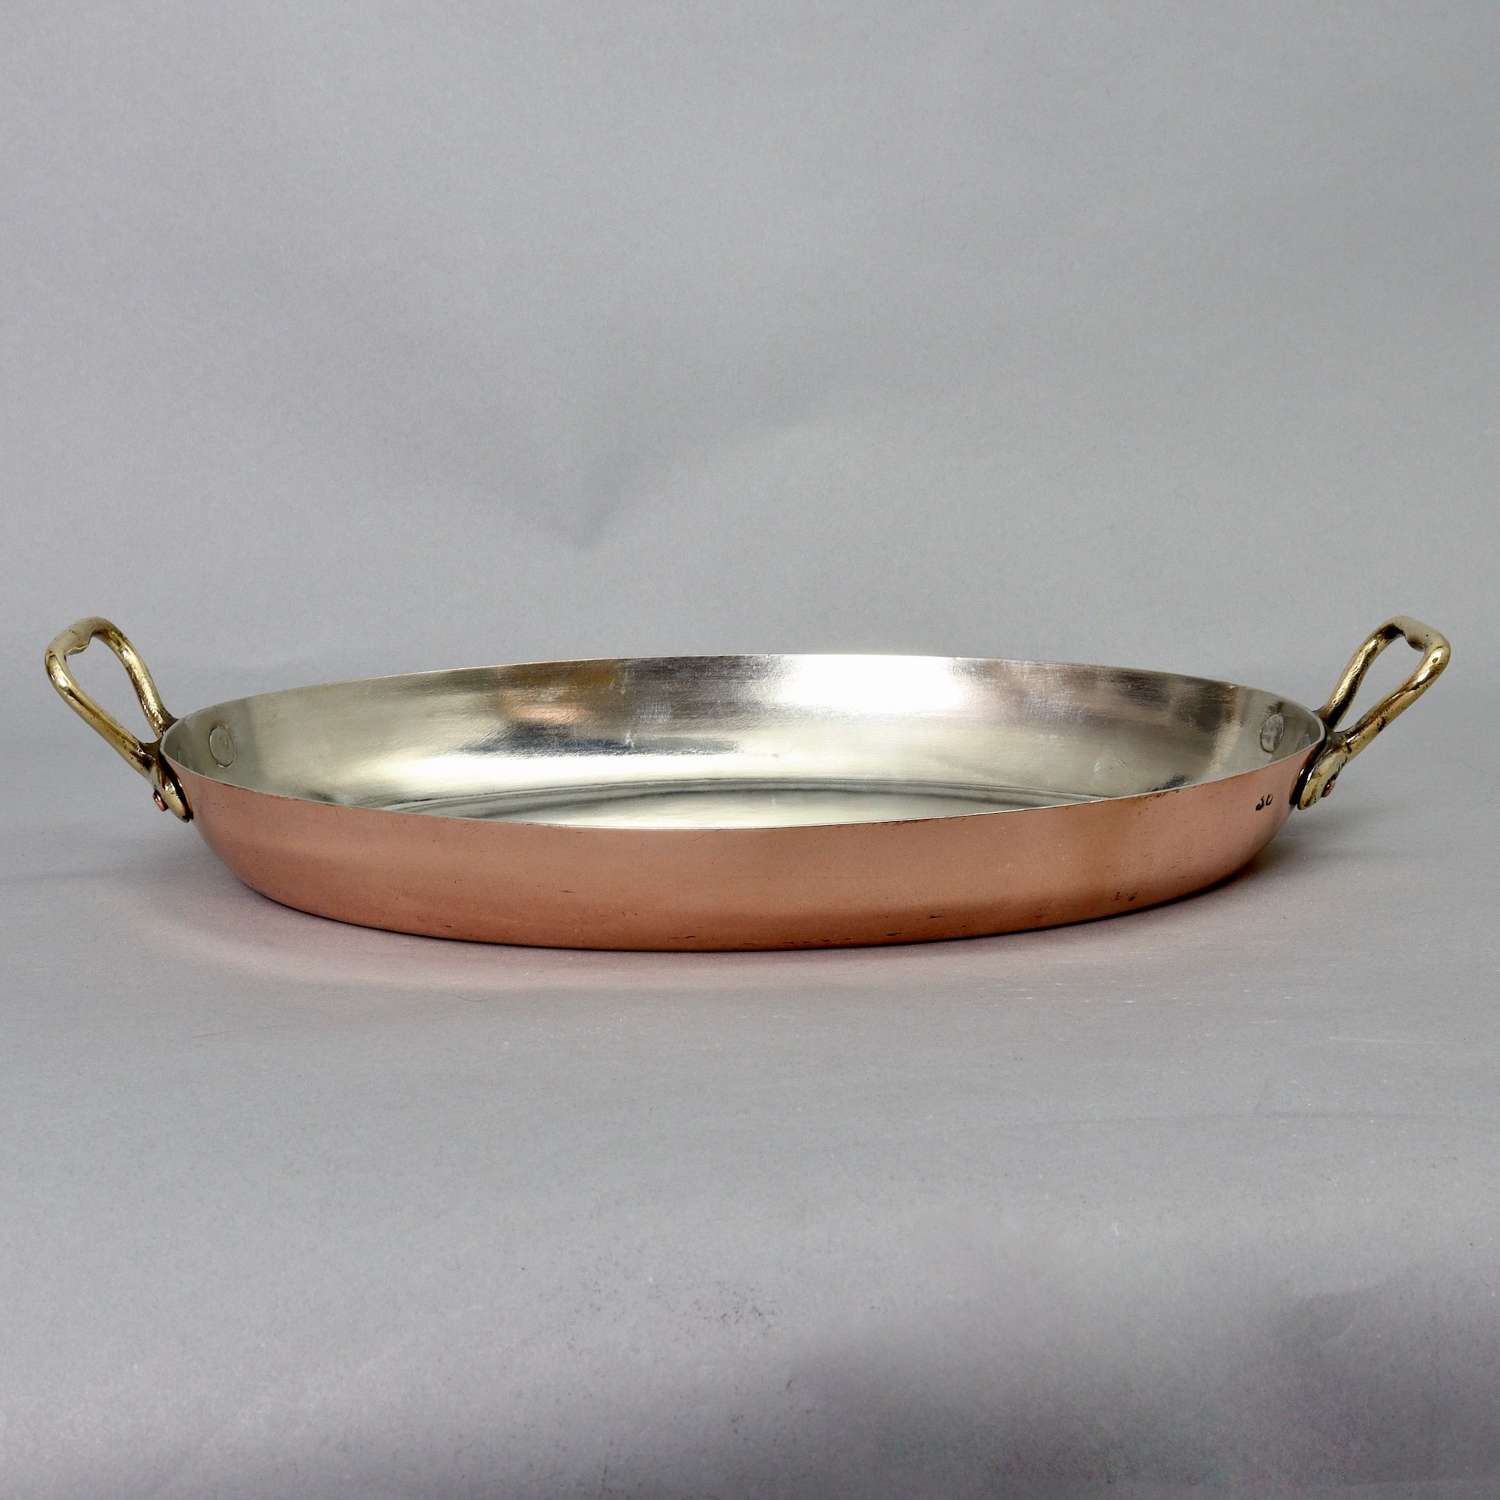 French, Oval Baking Dish or Gratin